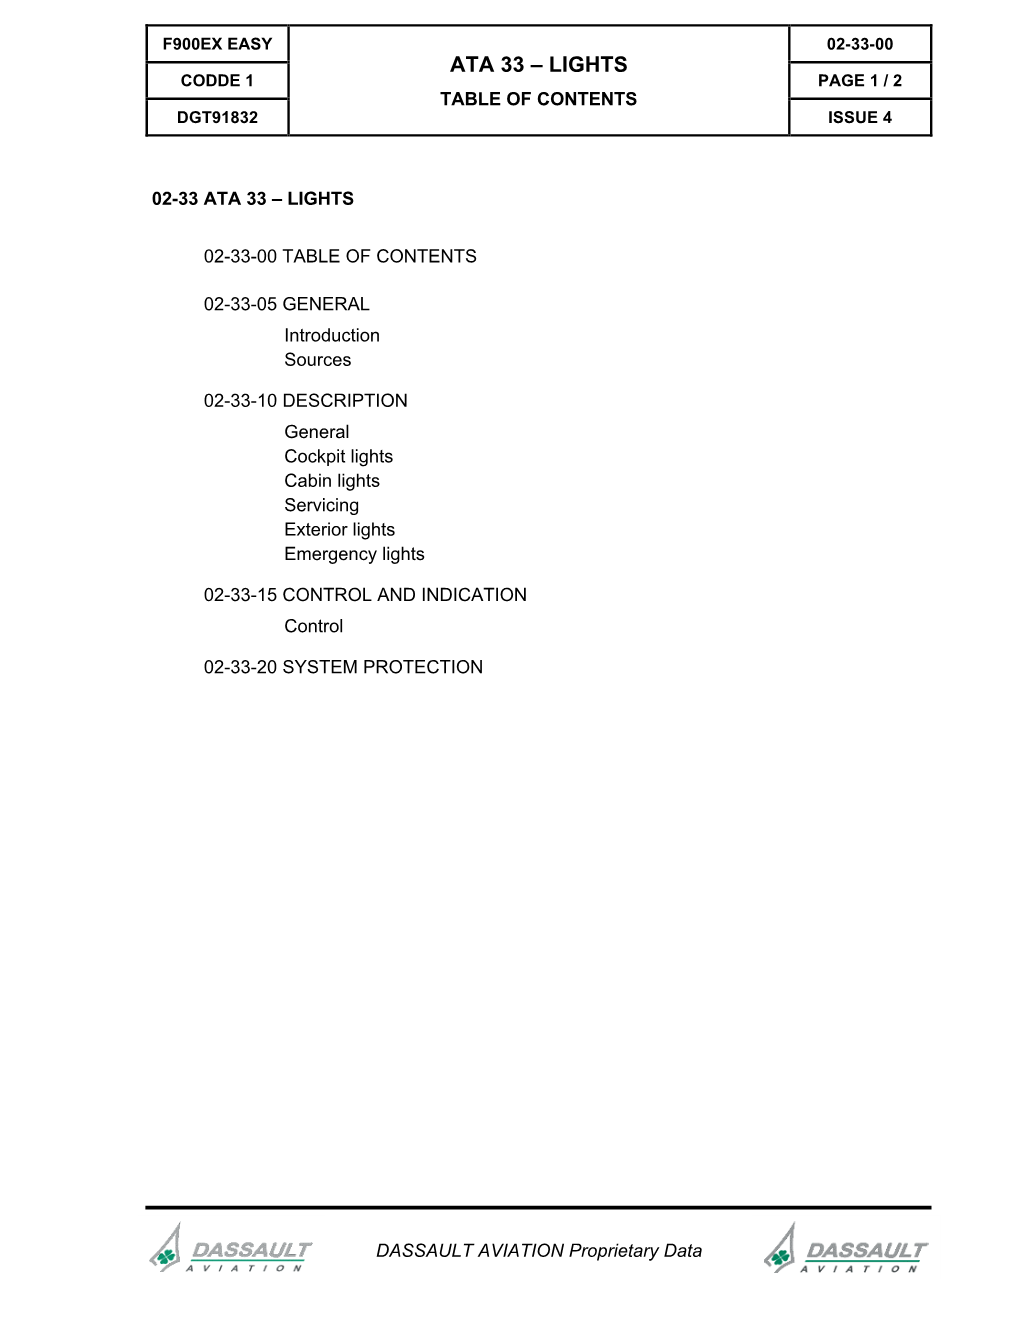 Ata 33 – Lights Codde 1 Page 1 / 2 Table of Contents Dgt91832 Issue 4